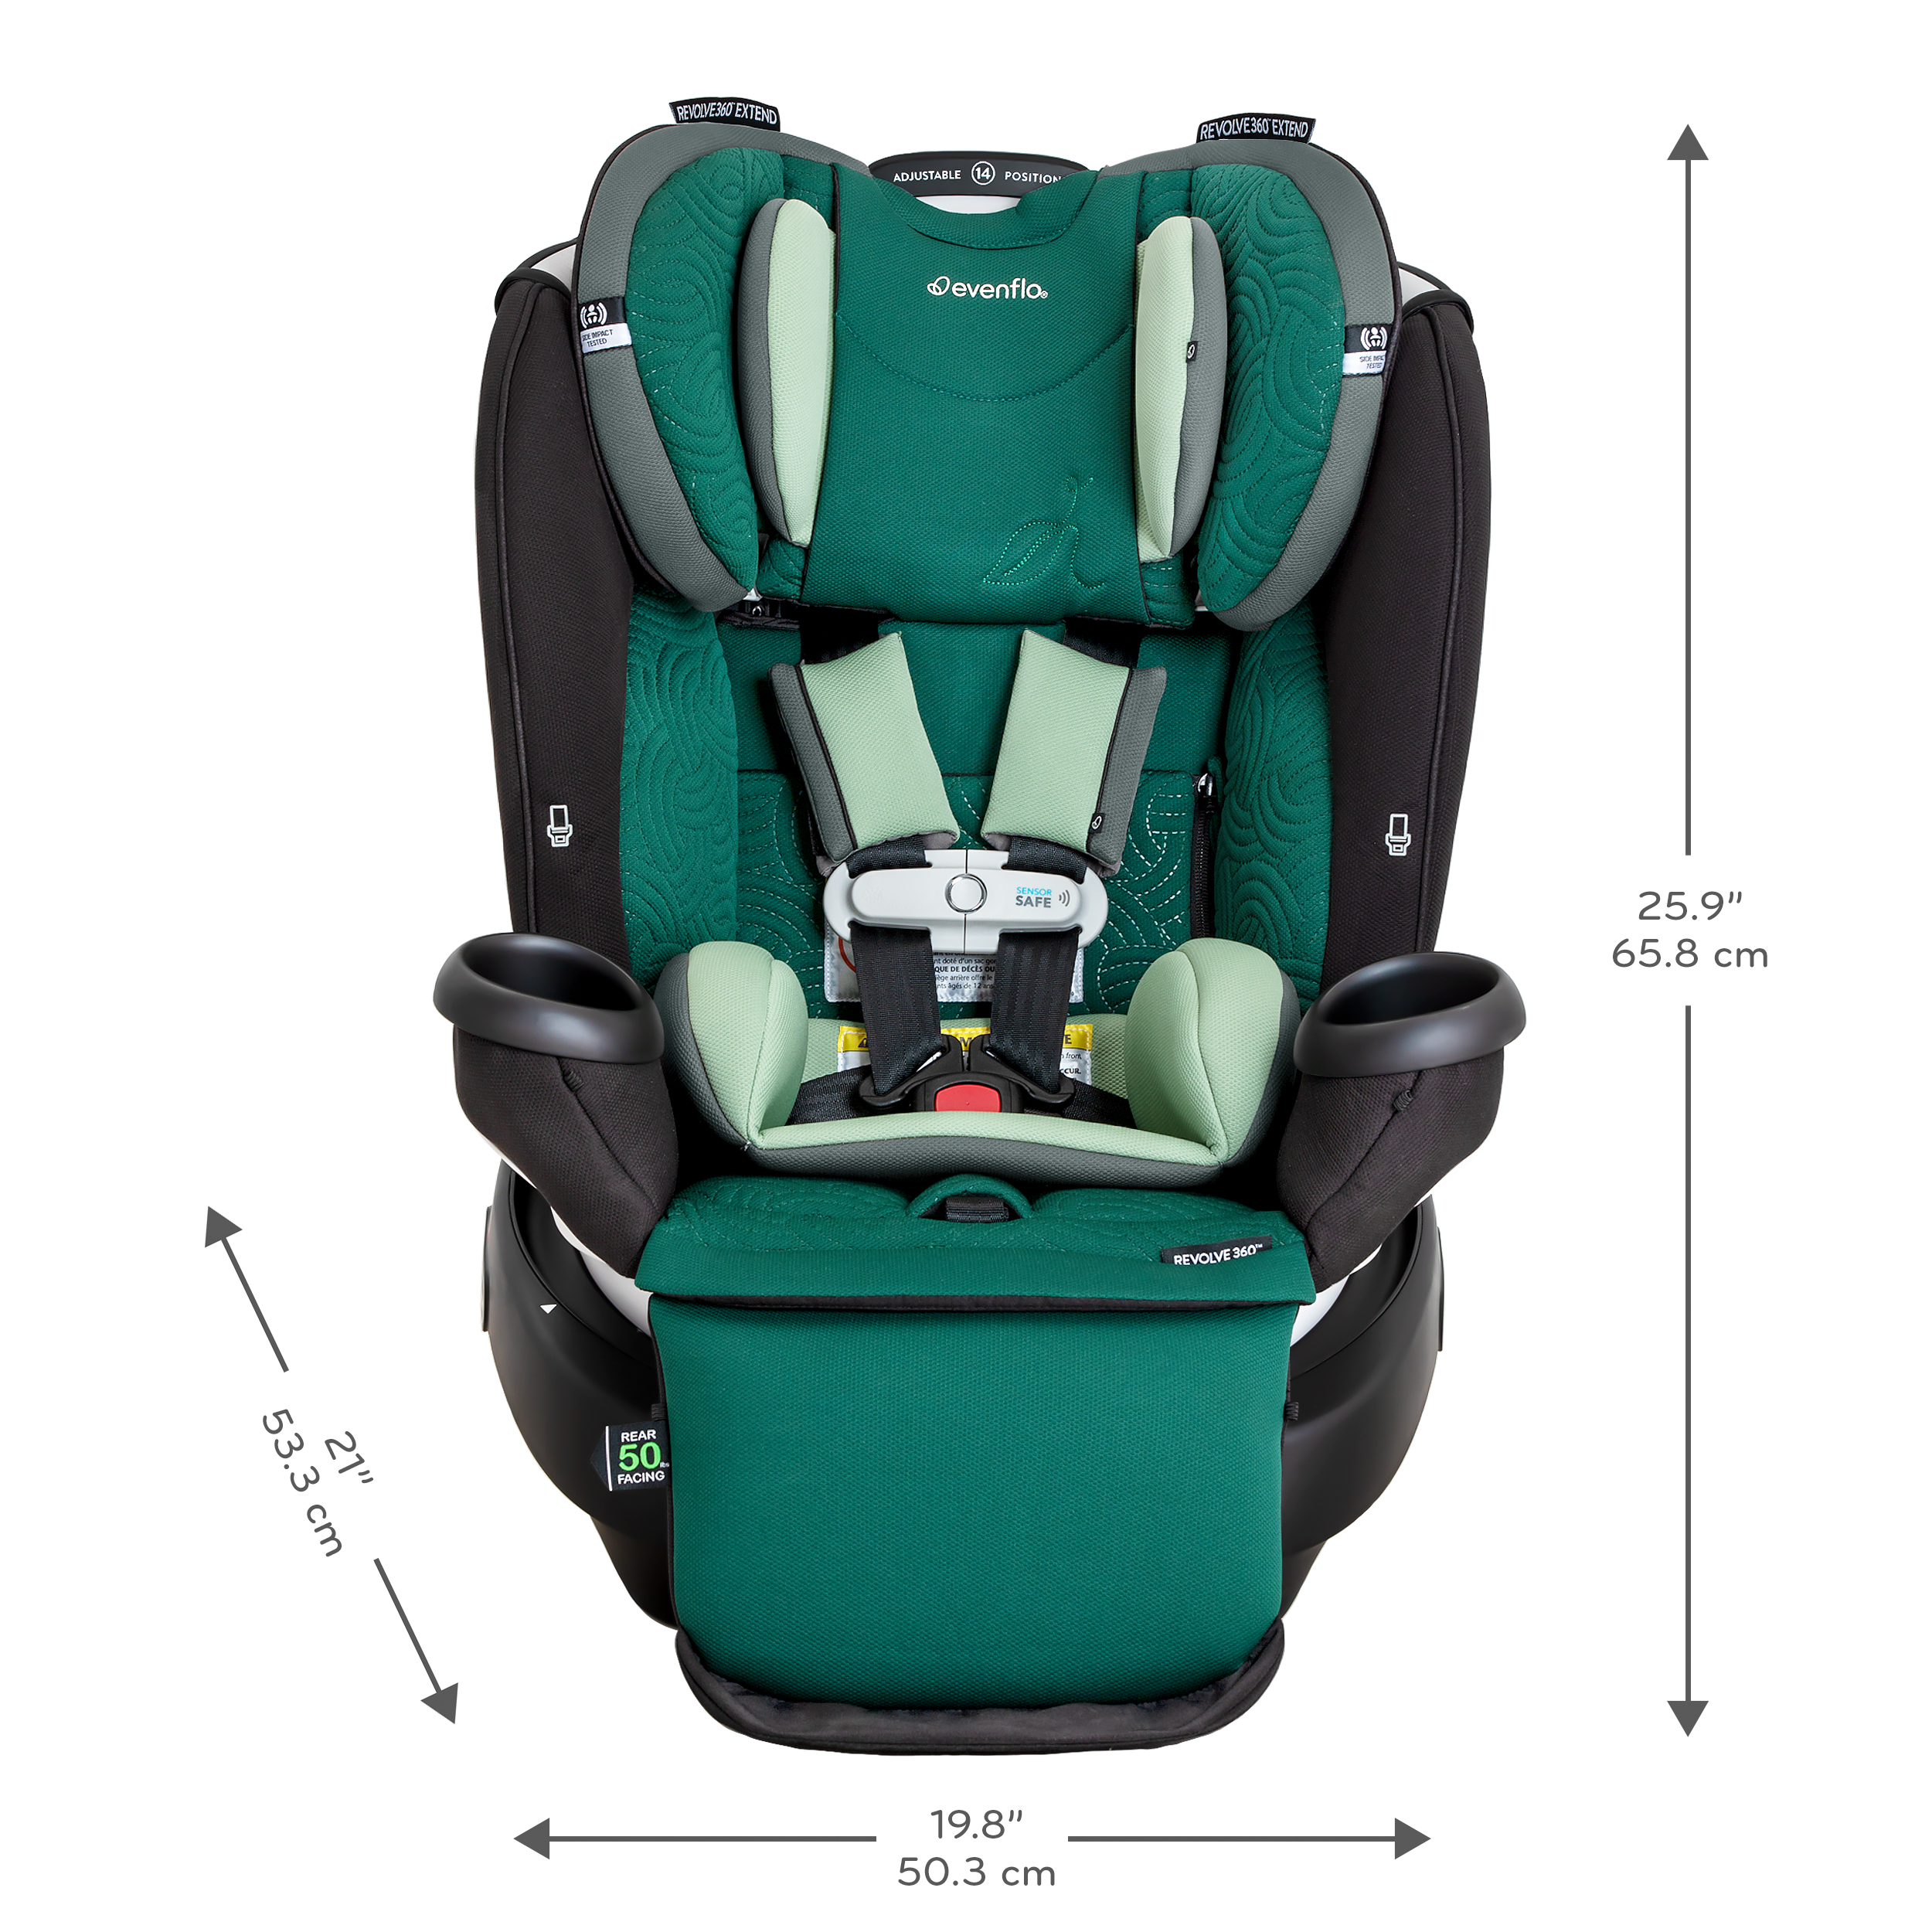 Revolve360 Extend All-in-One Rotational Car Seat with Green & Gentle Fabric Specifications